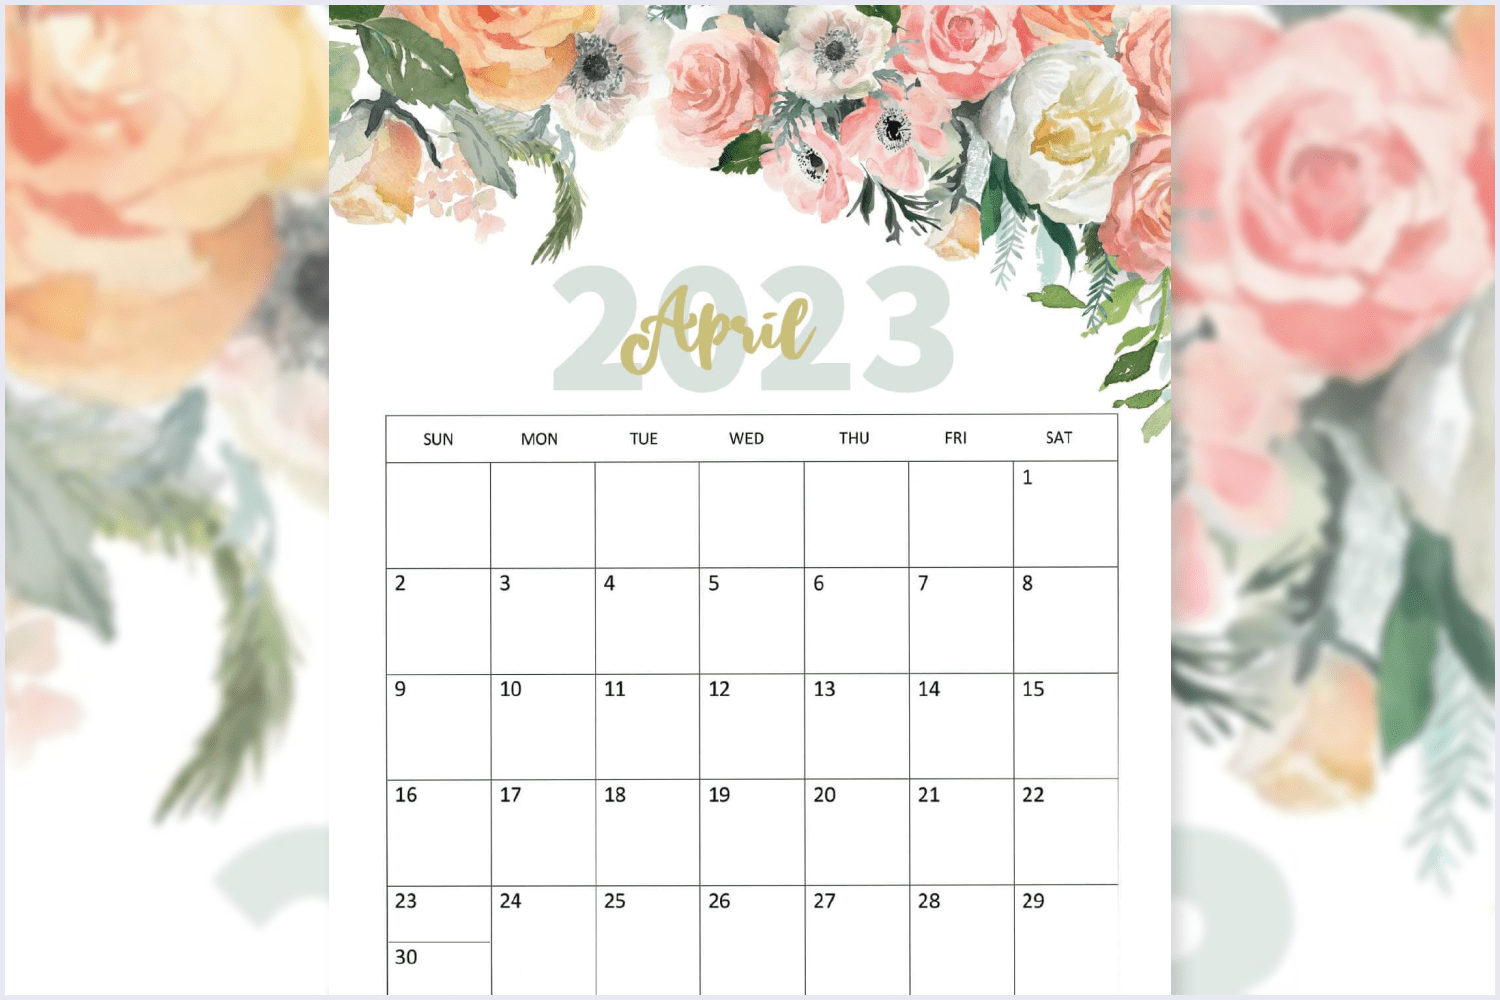 April calendar featuring soft pastel hues and delicate floral designs.